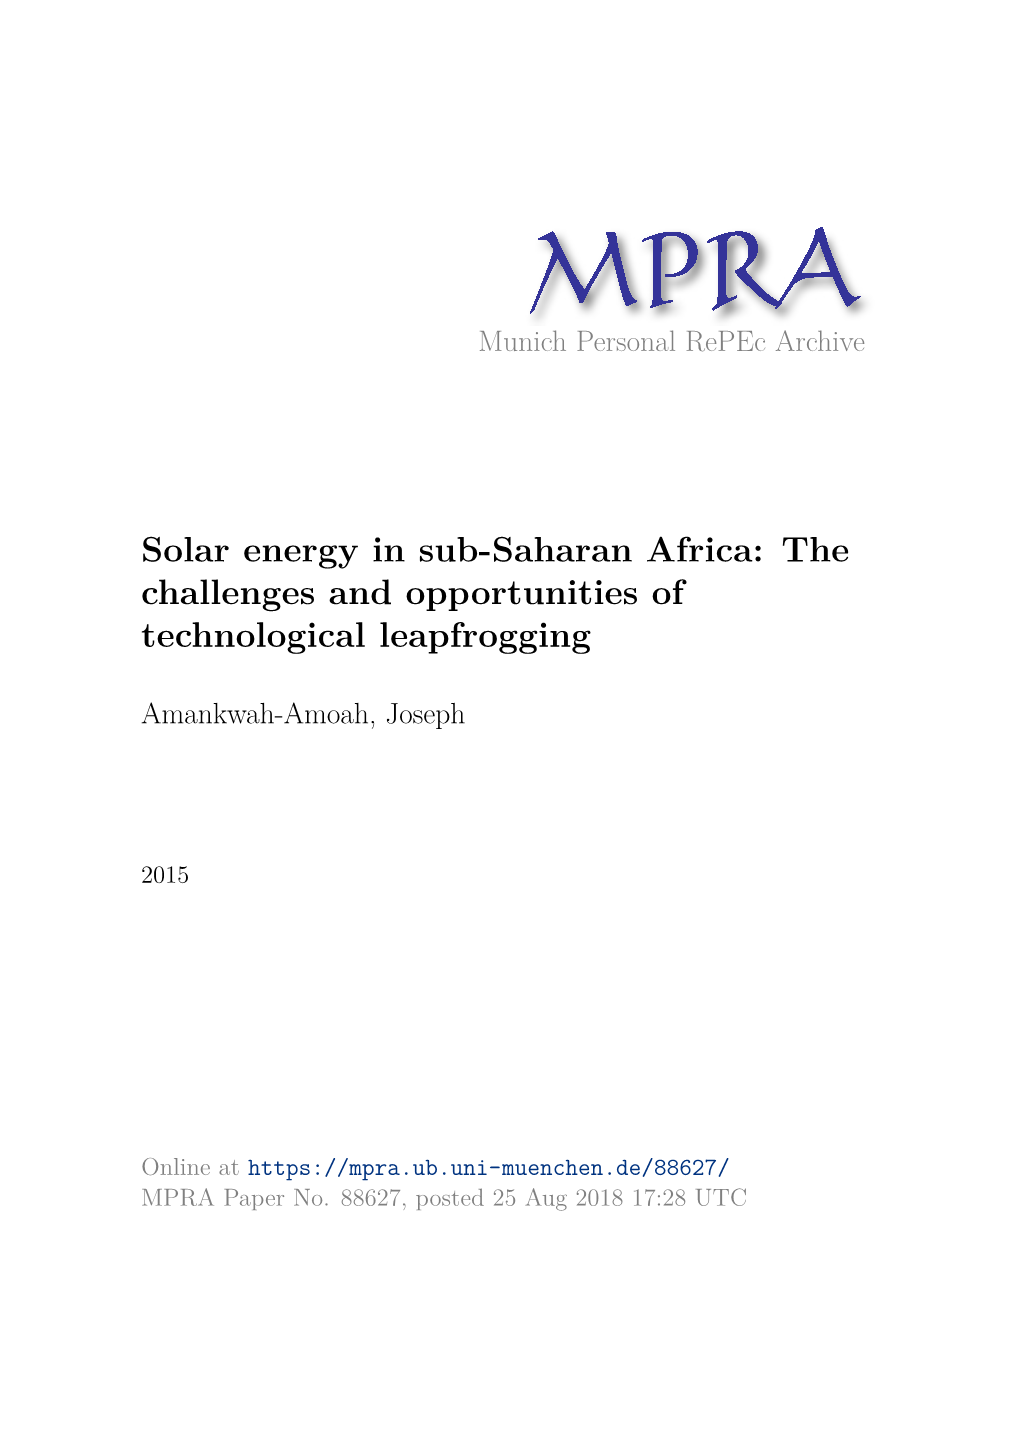 Solar Energy in Sub-Saharan Africa: the Challenges and Opportunities of Technological Leapfrogging